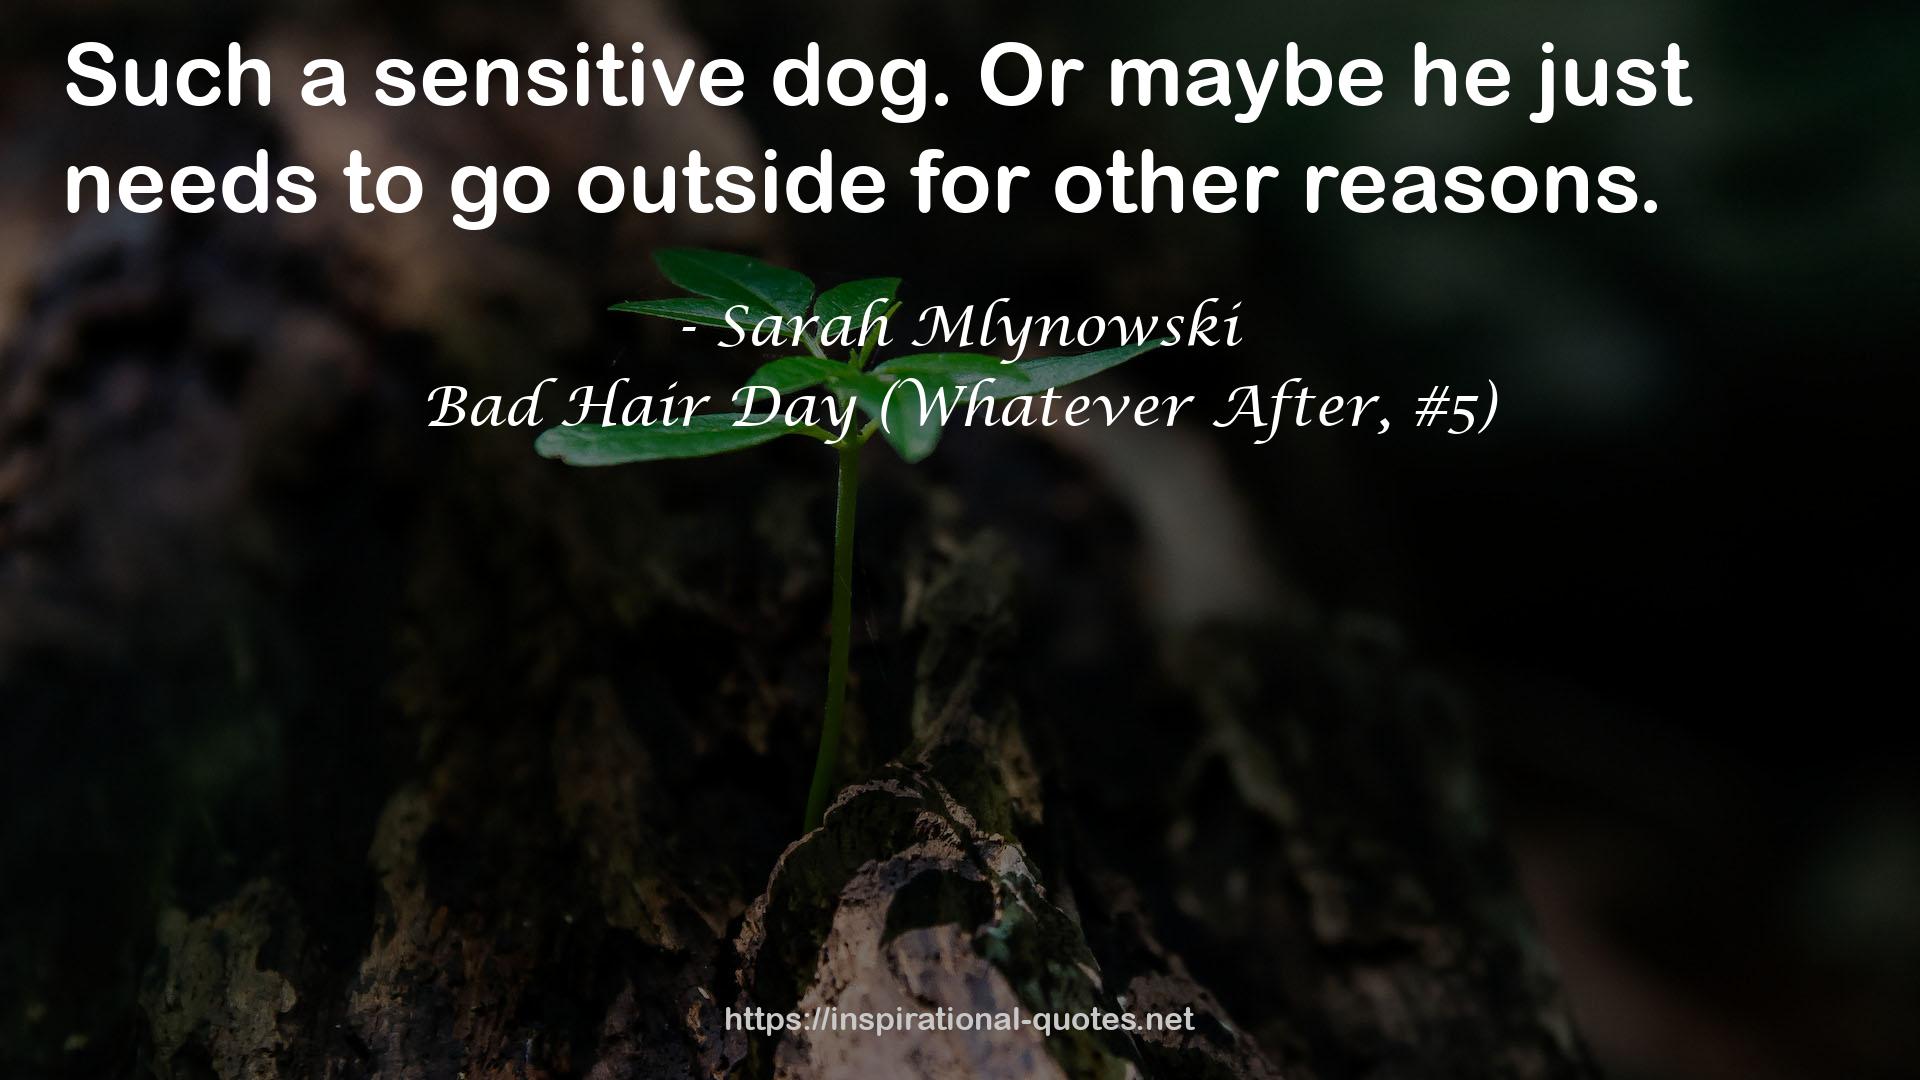 Bad Hair Day (Whatever After, #5) QUOTES